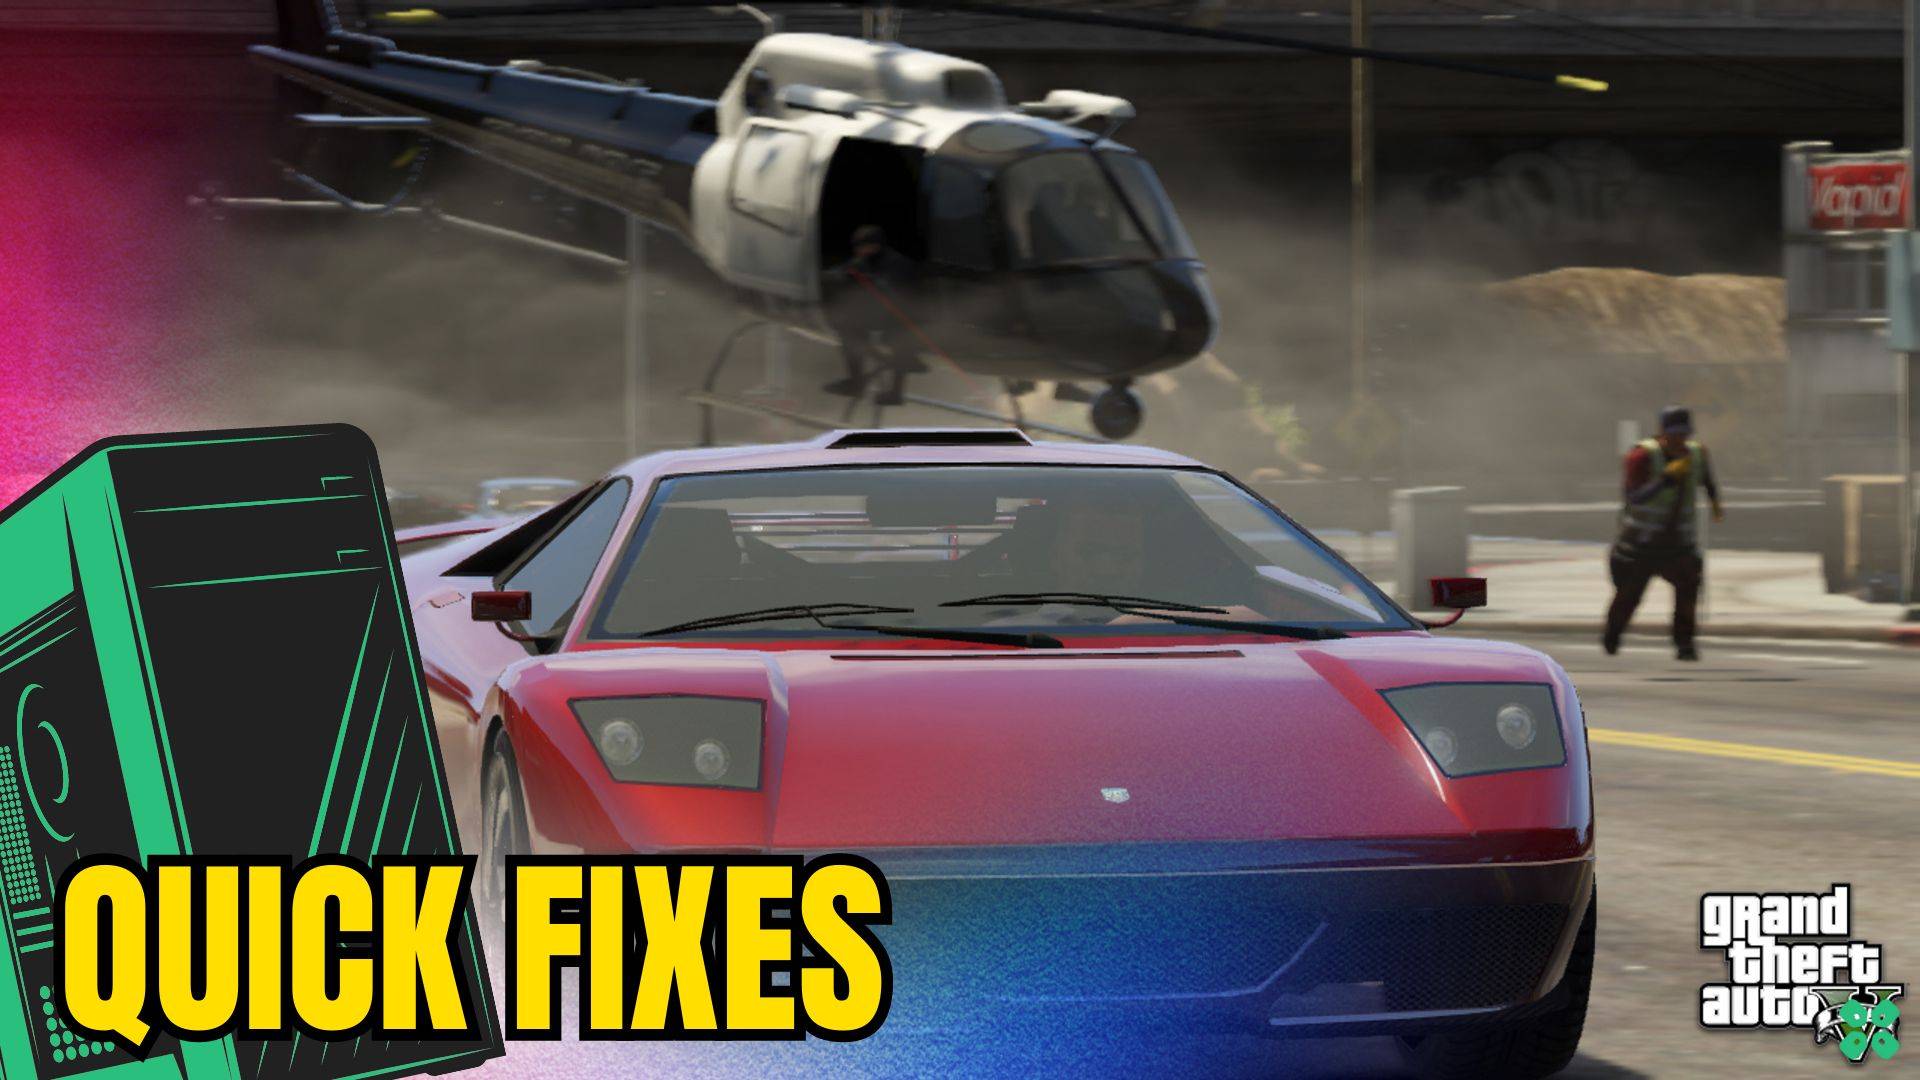 Artwork of Grand Theft Auto V and its fix of lagging by TCG